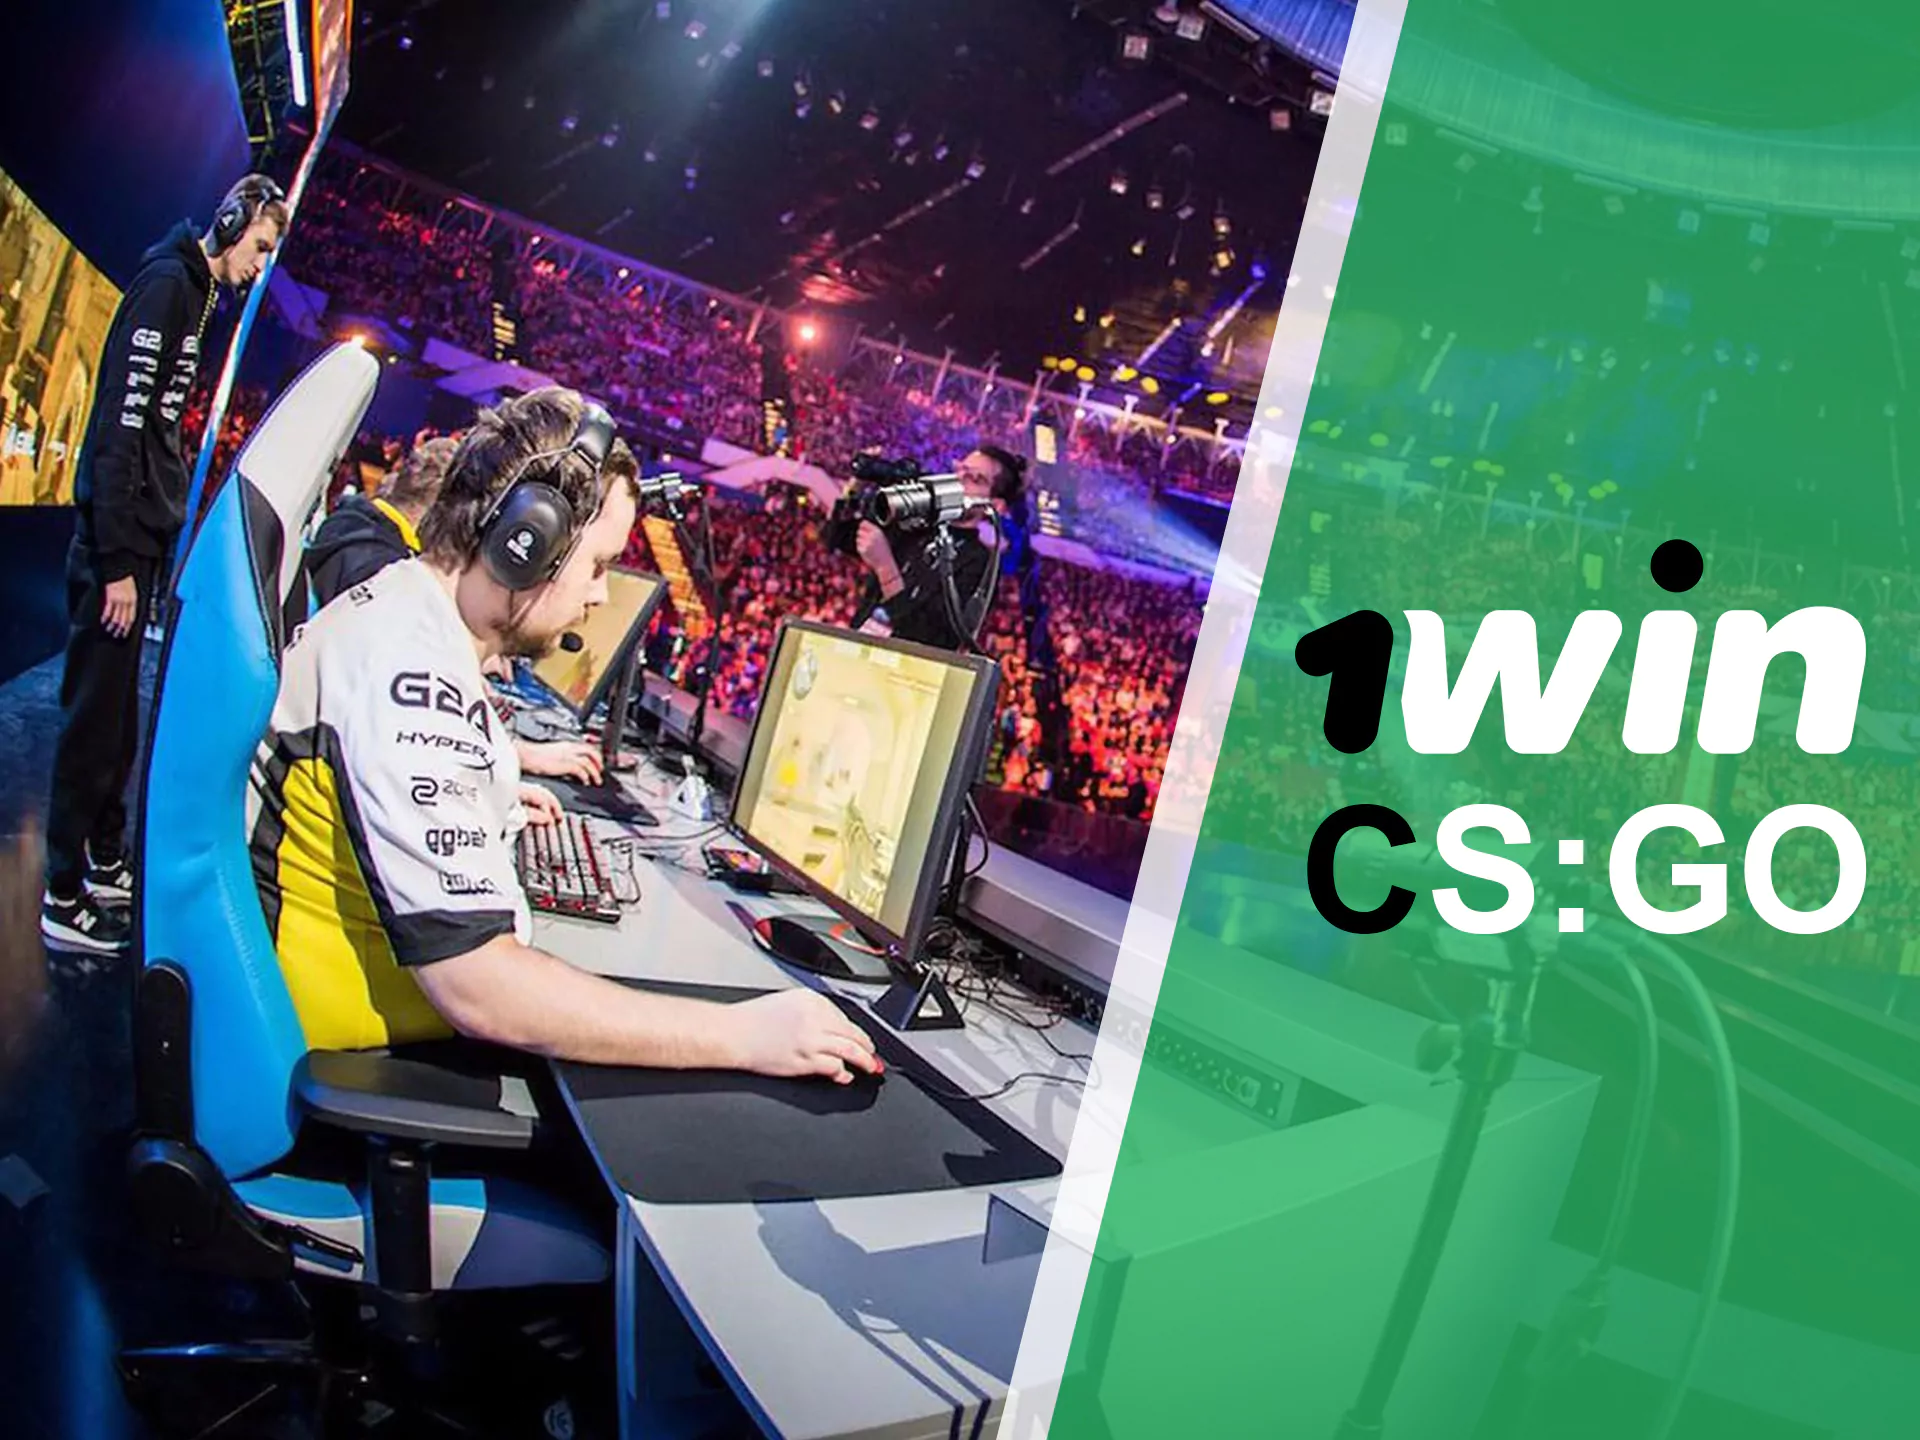 Watch at 1win how your favourite CS:GO team win the tournament.